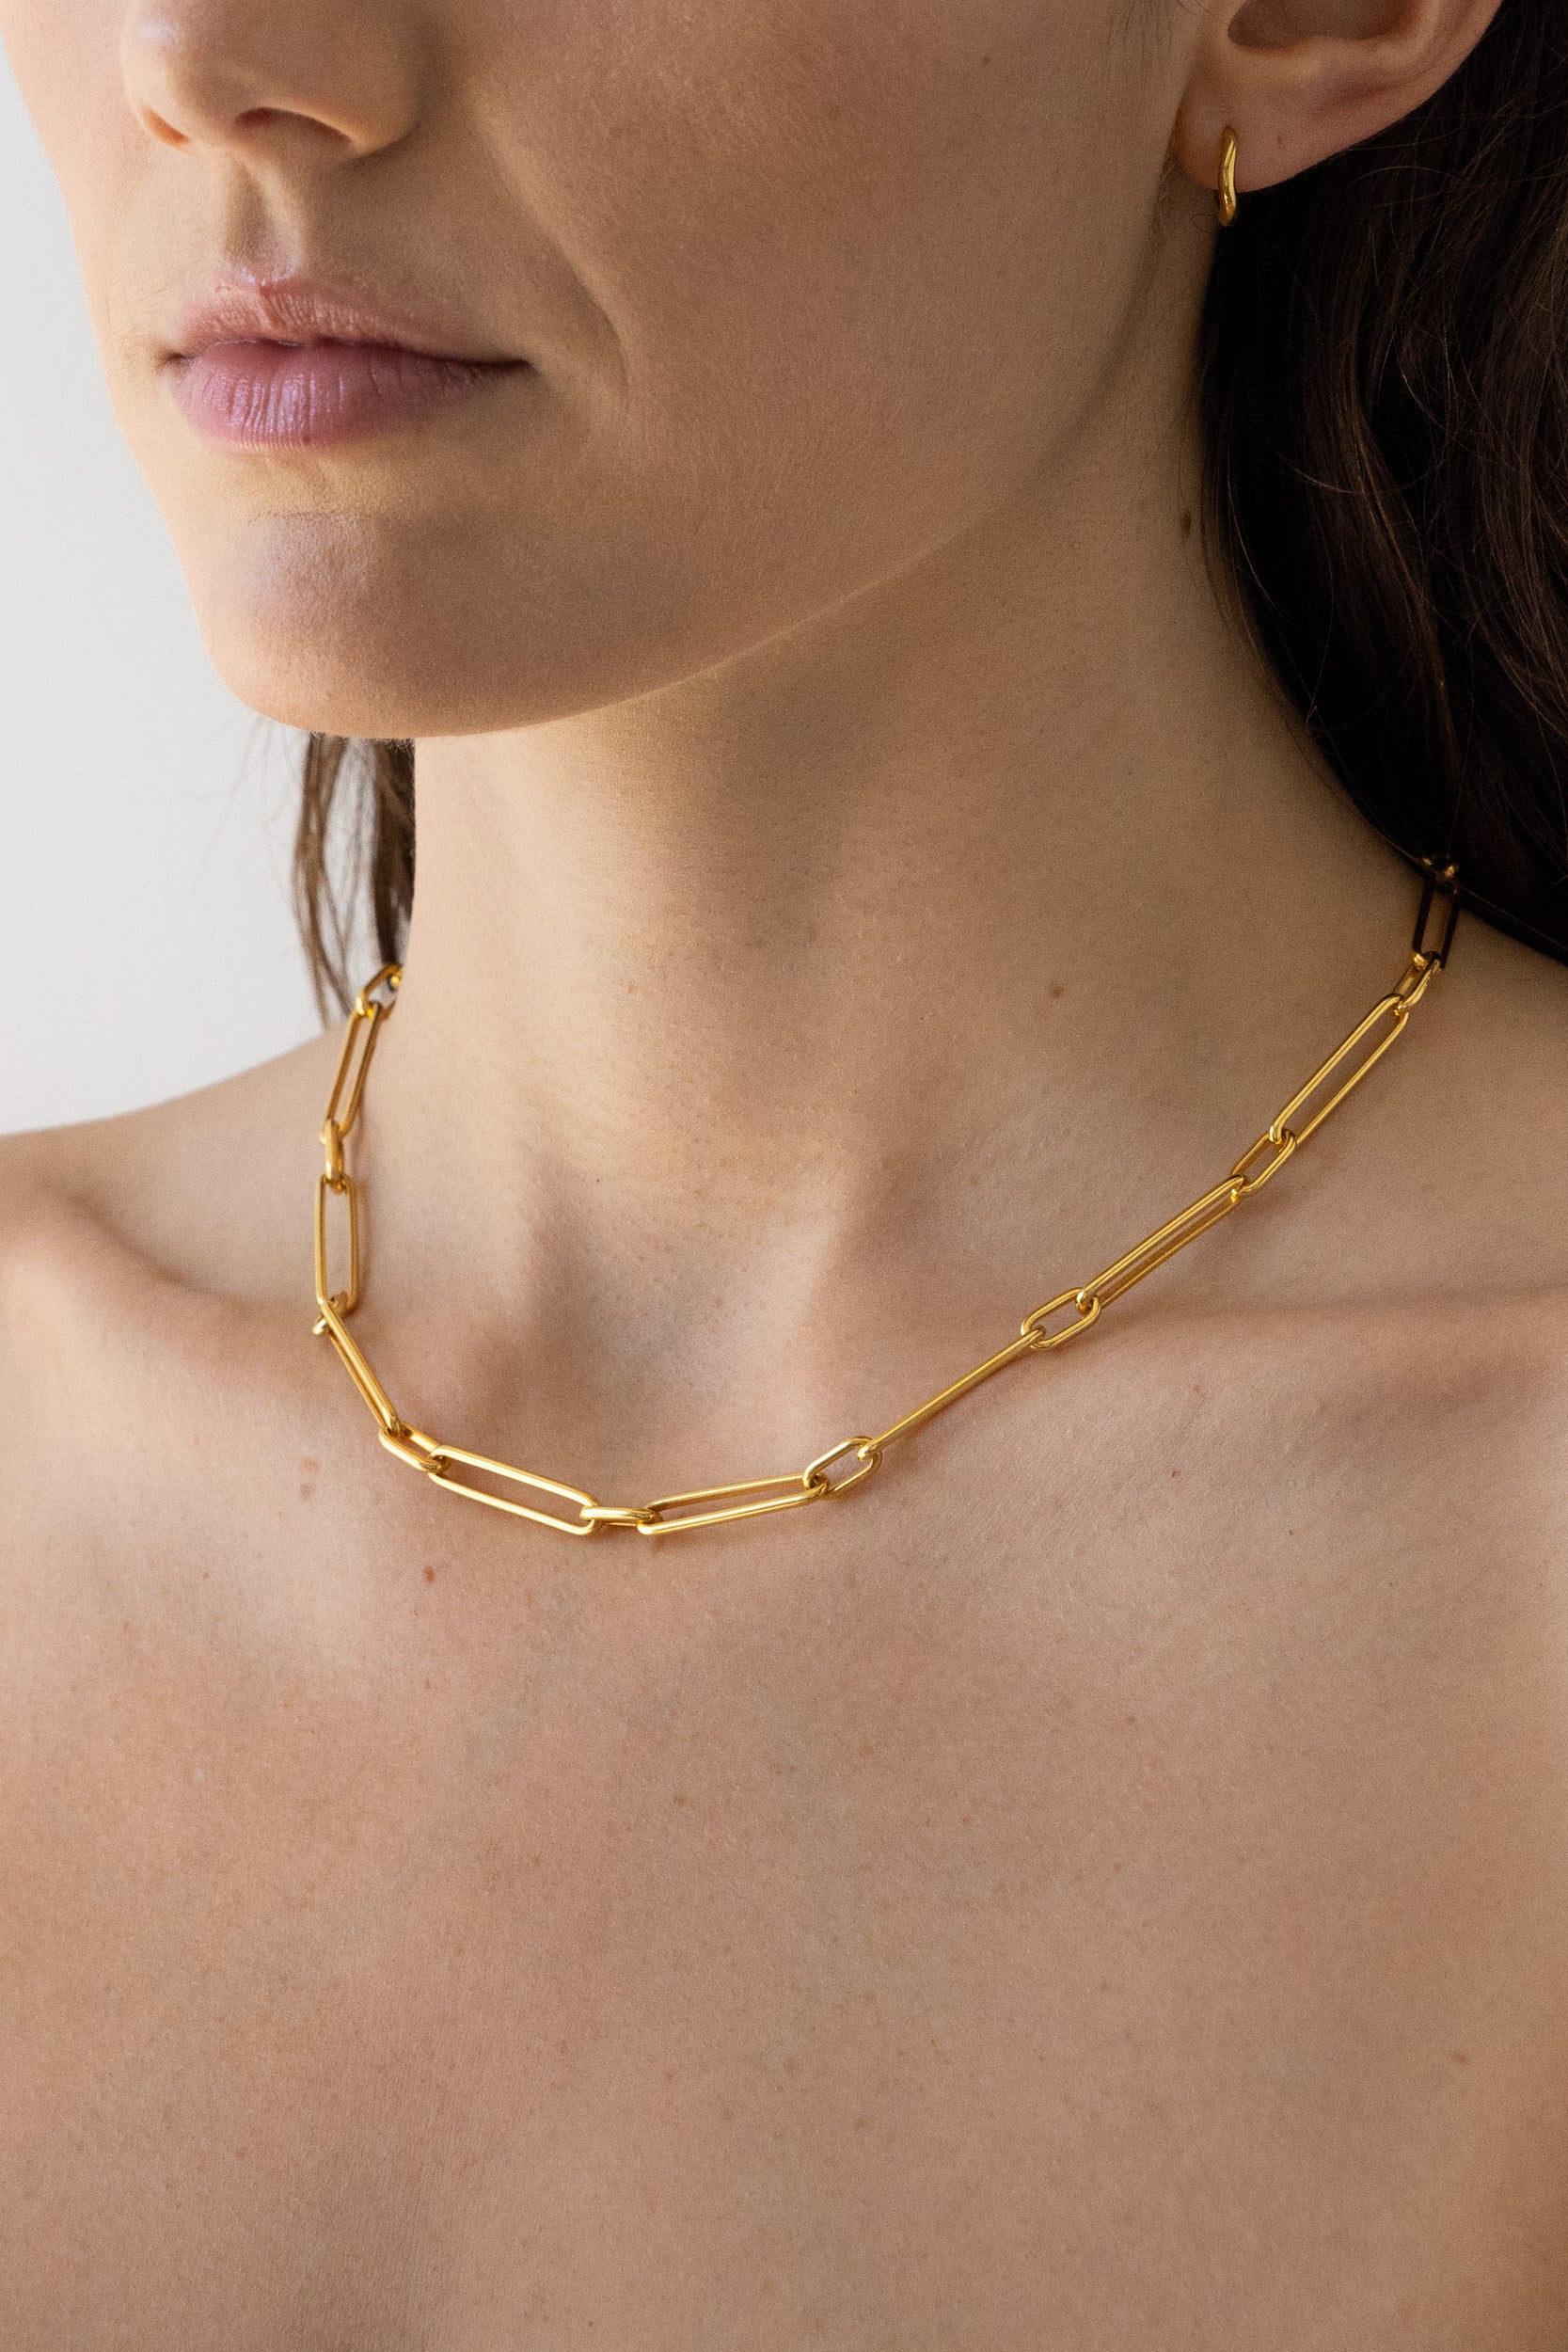 Jean Chain Necklace - 14k Gold Plated